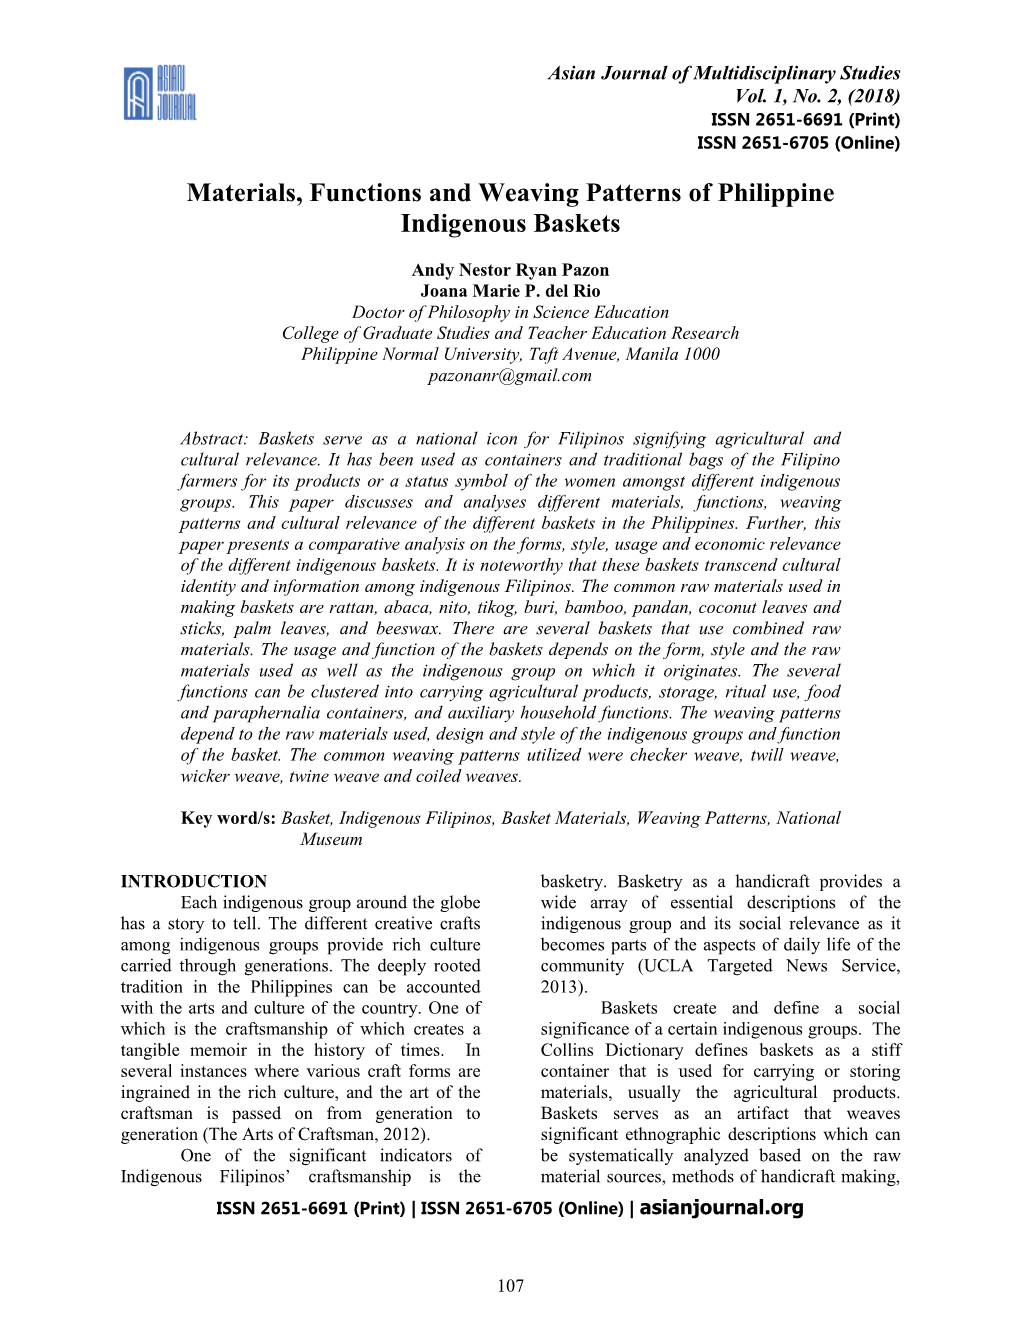 Materials, Functions and Weaving Patterns of Philippine Indigenous Baskets